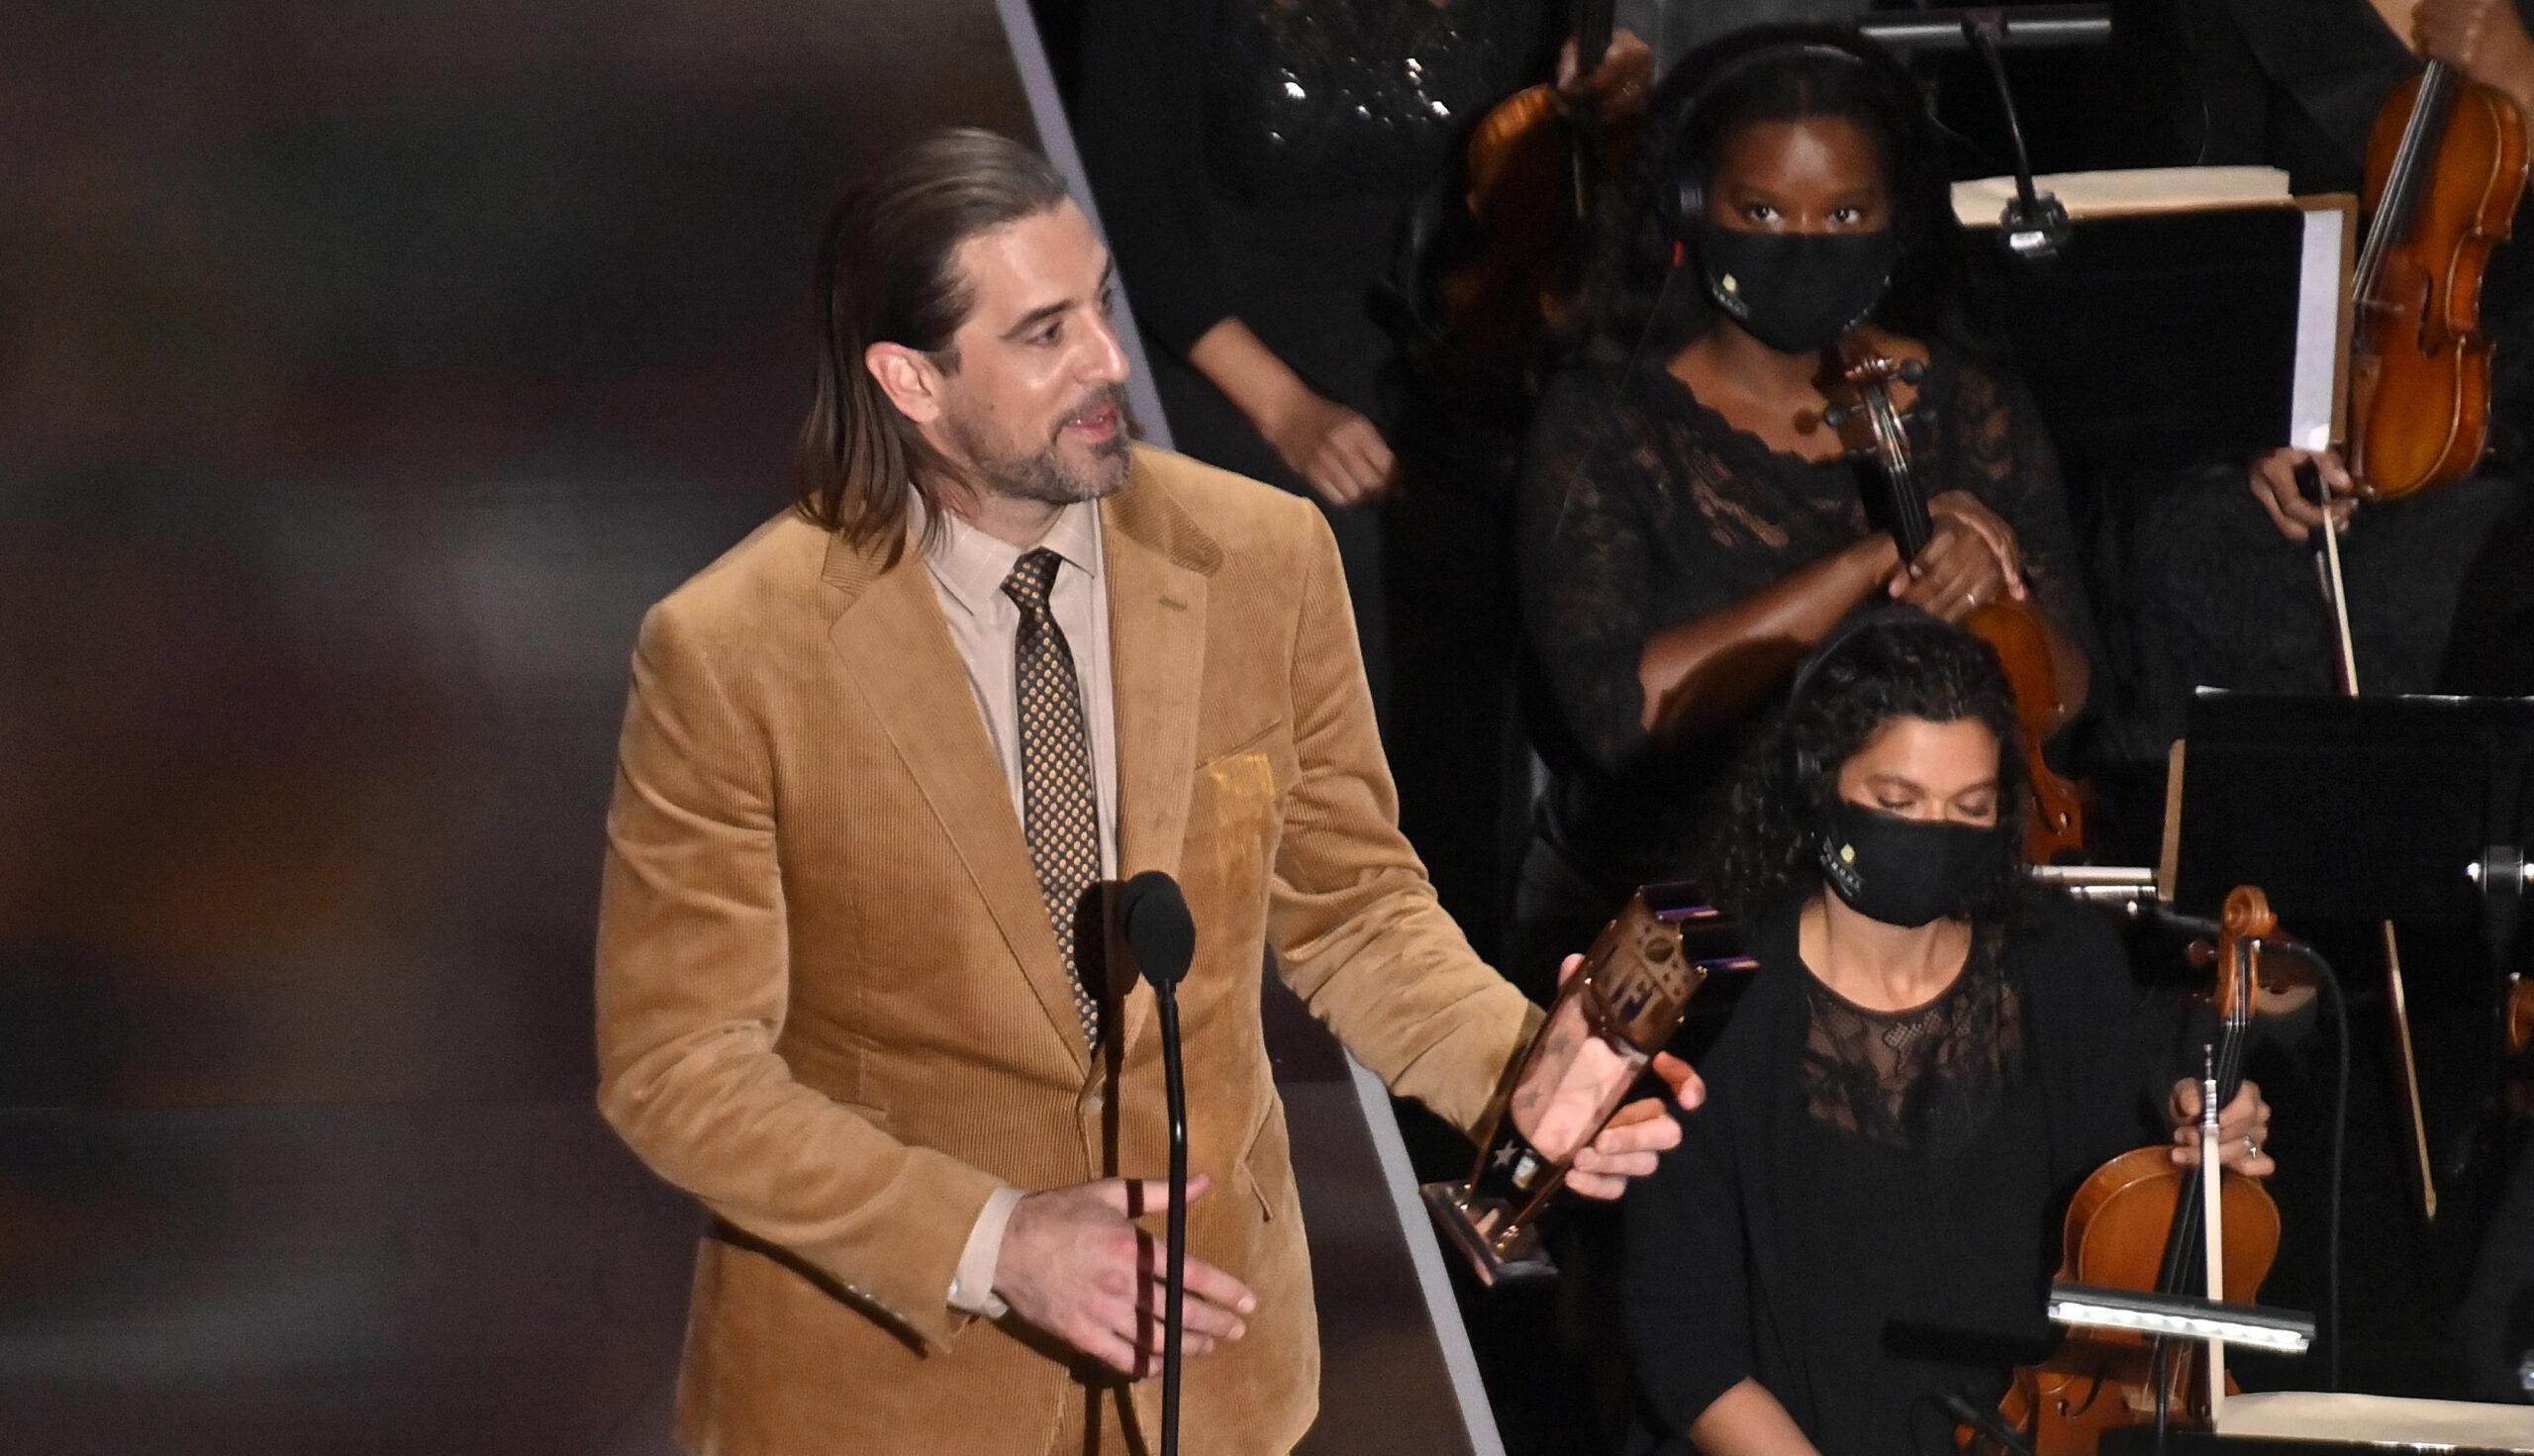 Aaron Rodgers accepts the NFL MVP award at You Tube Theater